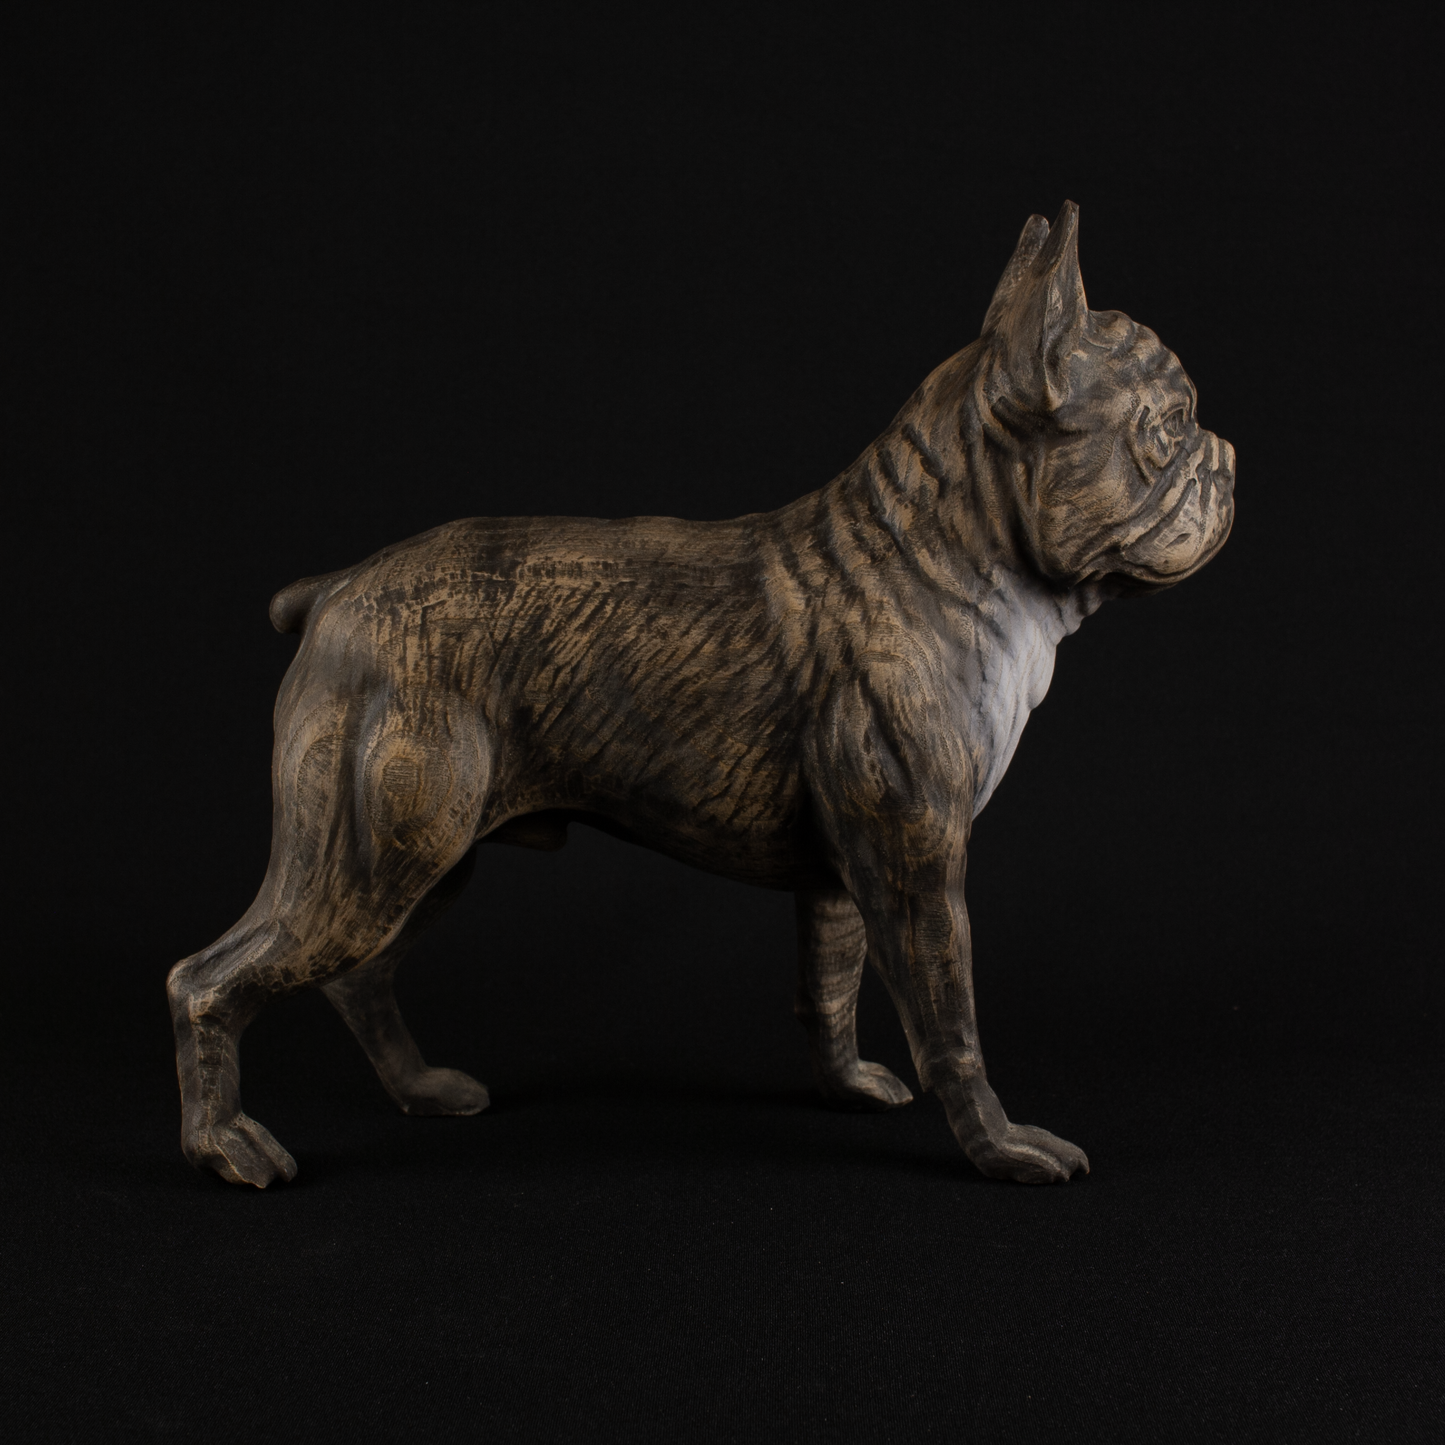 Bulldog's Ashen Guardian: A Wooden Figurine Inspired by French Bulldogs